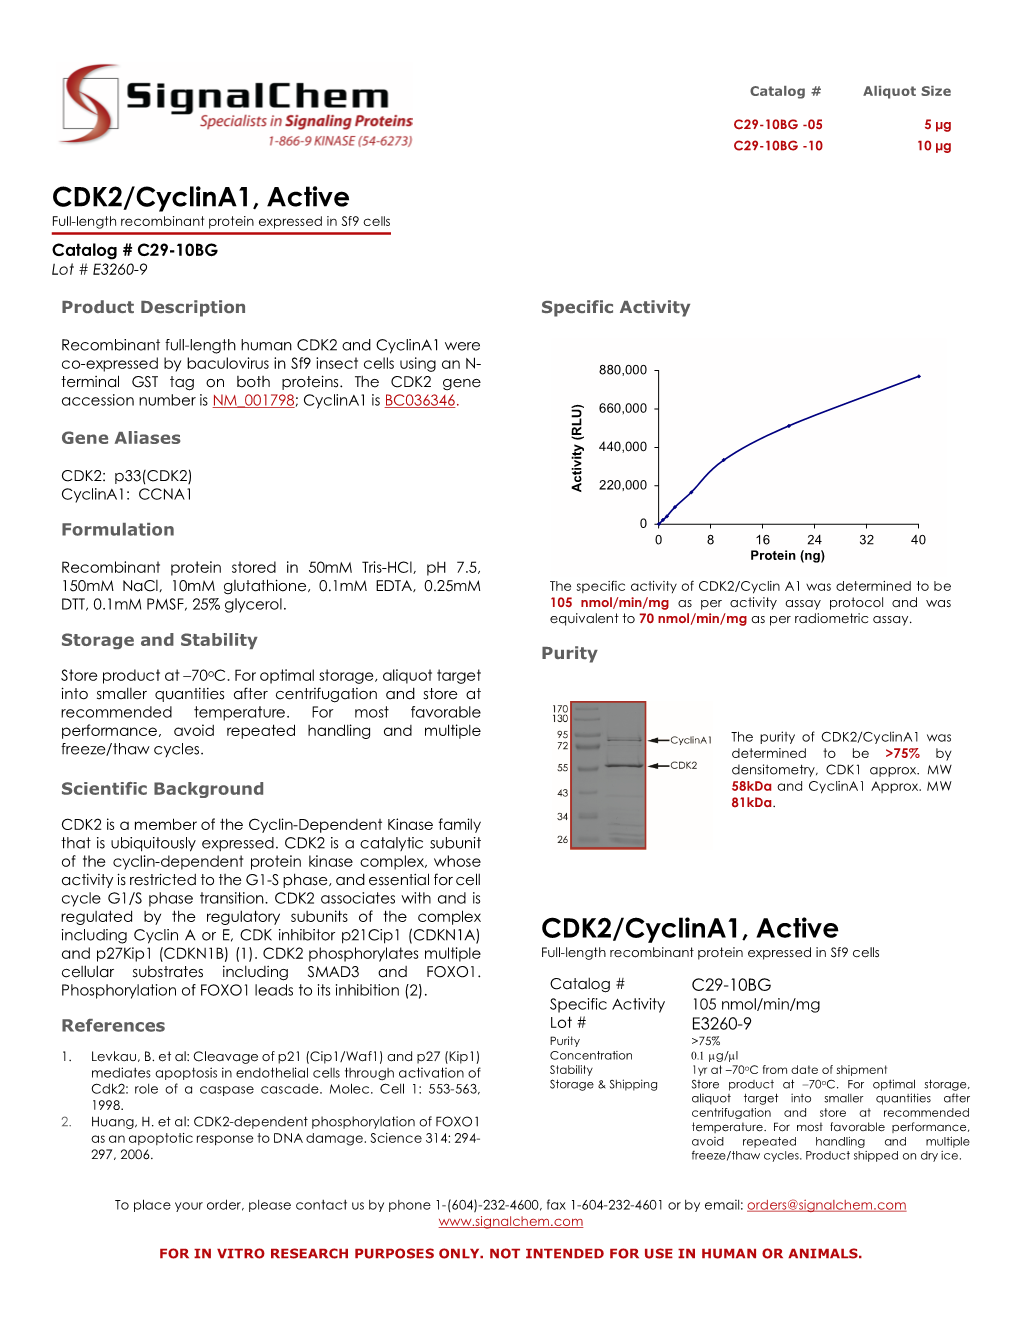 CDK2/Cyclina1, Active Full-Length Recombinant Protein Expressed in Sf9 Cells